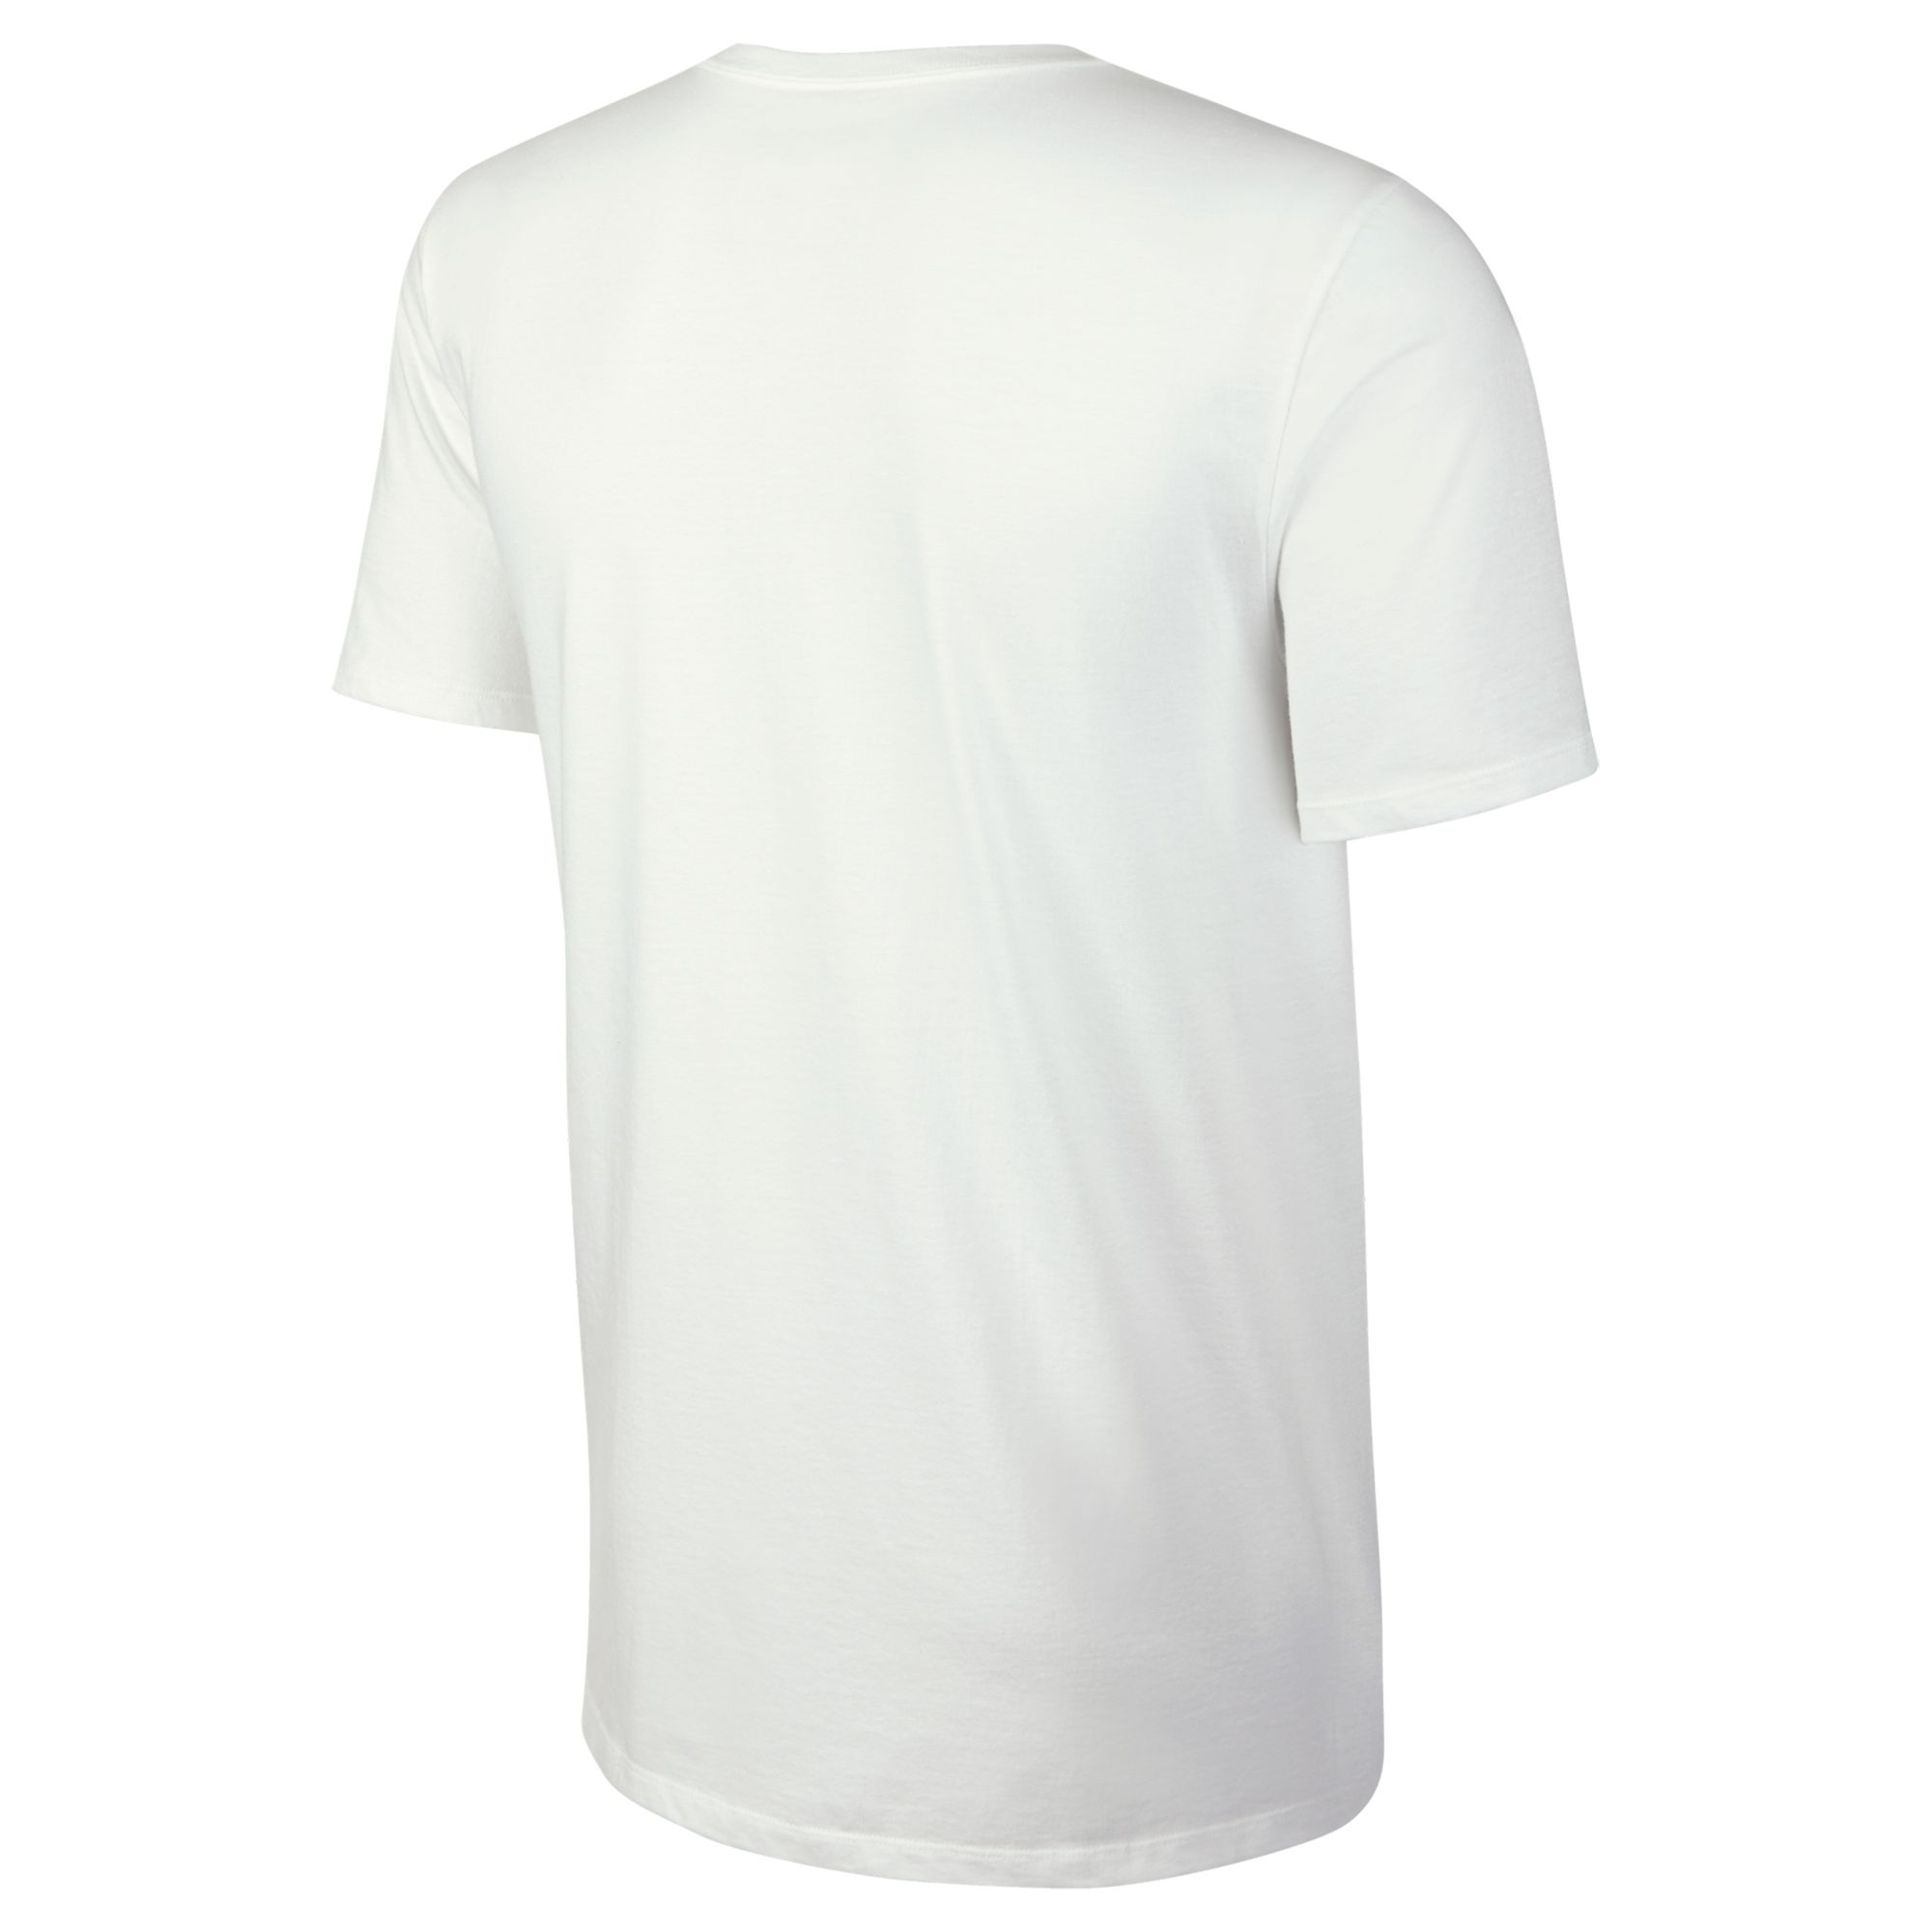 just do it t shirt white